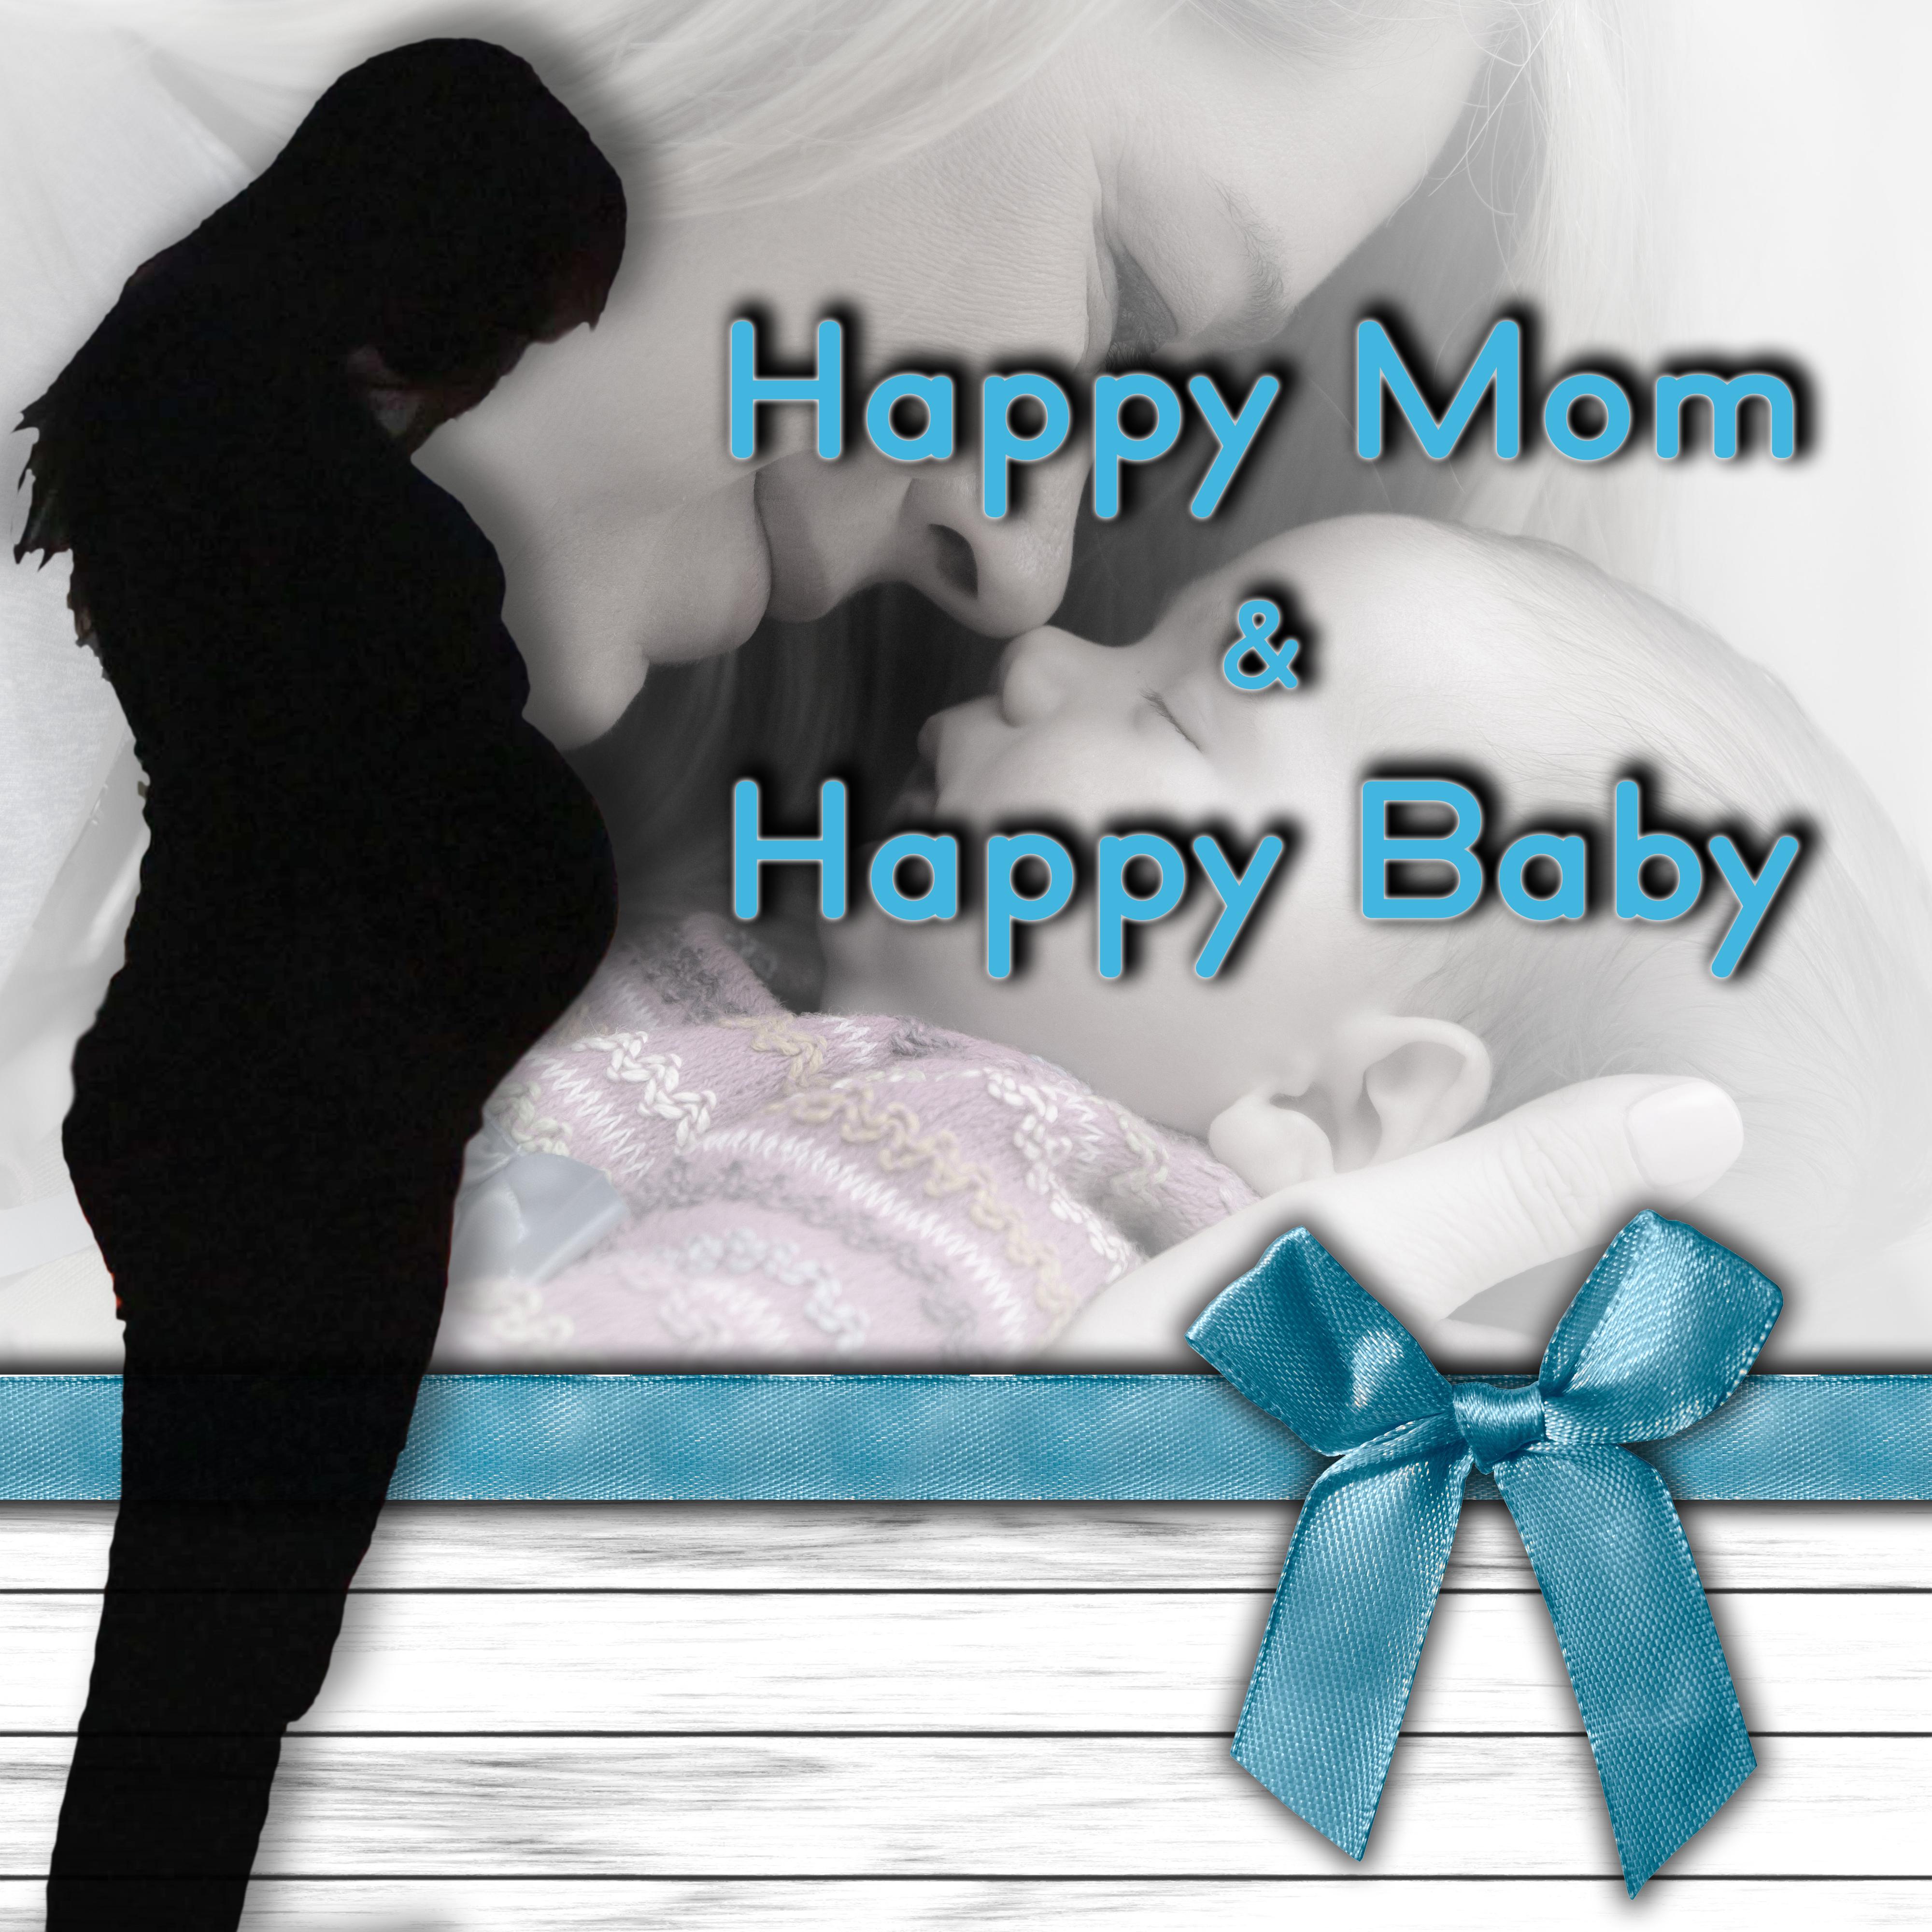 Happy Mom & Happy Baby - Meditation Relaxation for Mommy & Baby, Expecting a Miracle, Nature Sounds for Pregnant Women, Deep Breathing Serenity, New Age for Well Being